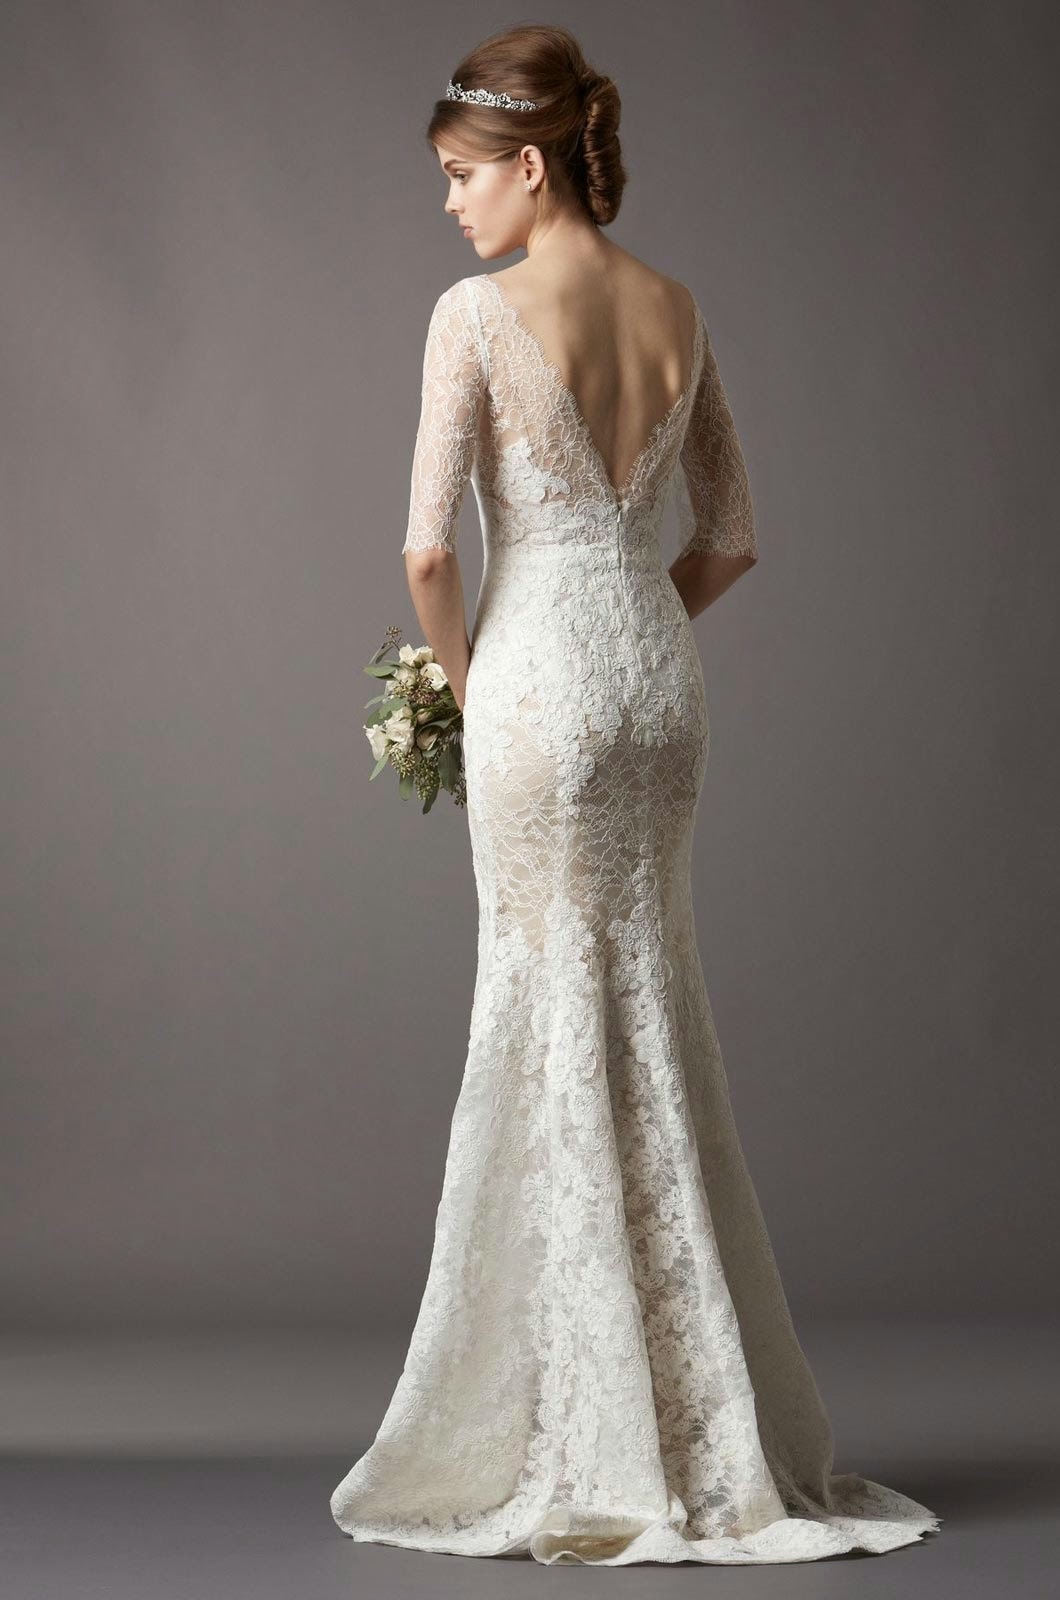 Stylish & Modern Lace Wedding Dresses with Long Sleeves Ideas